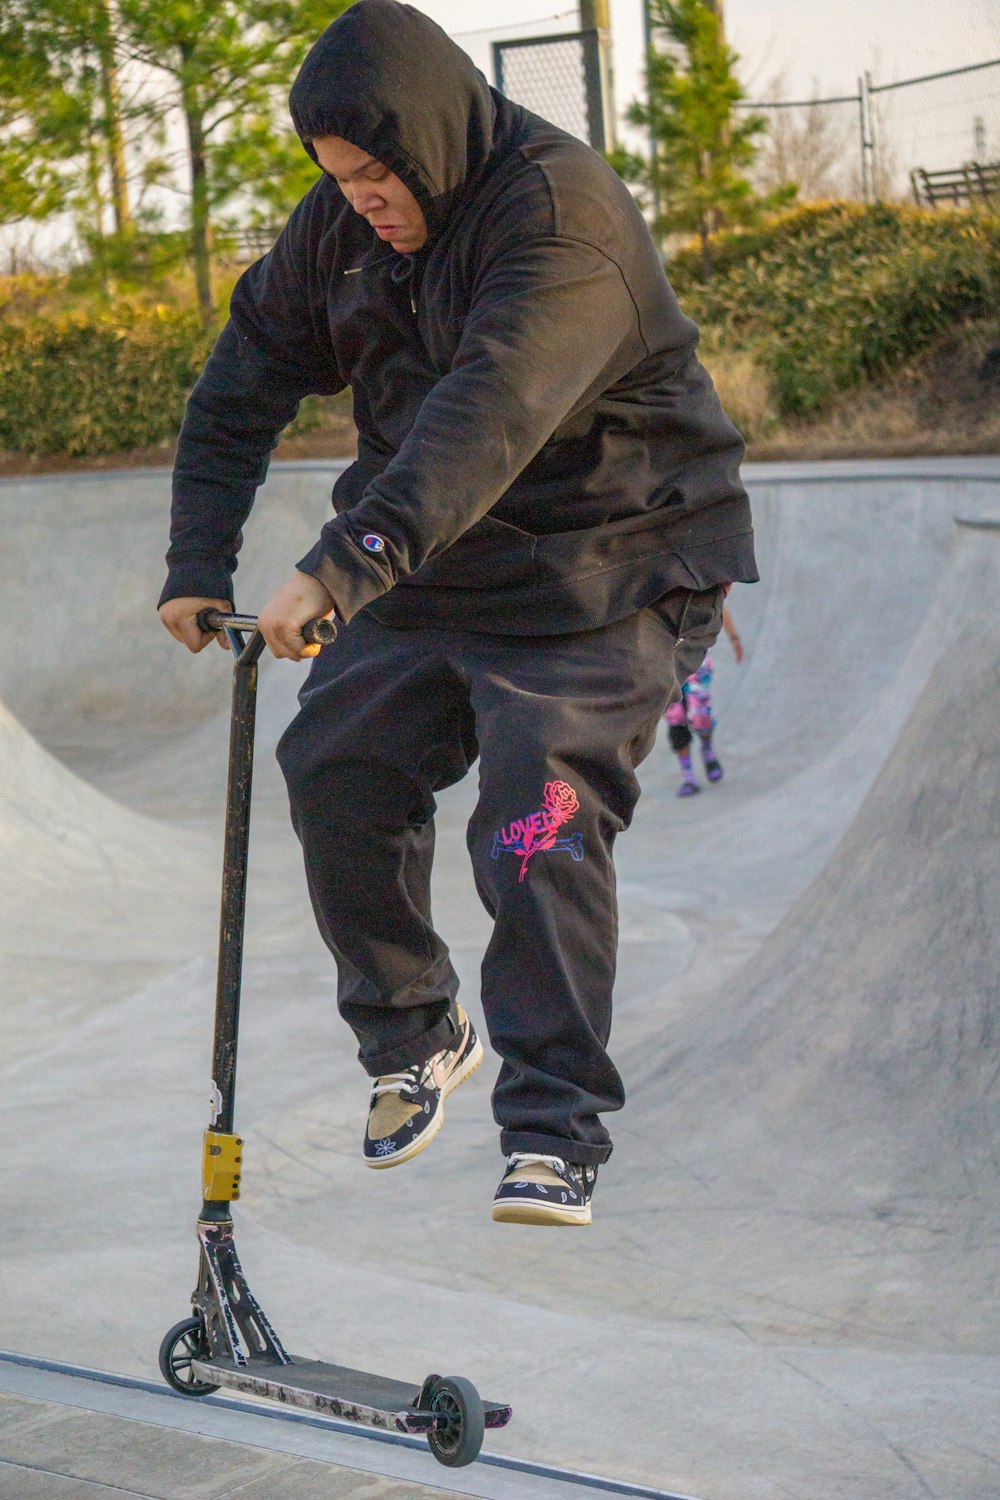 a man riding a scooter at a skate park